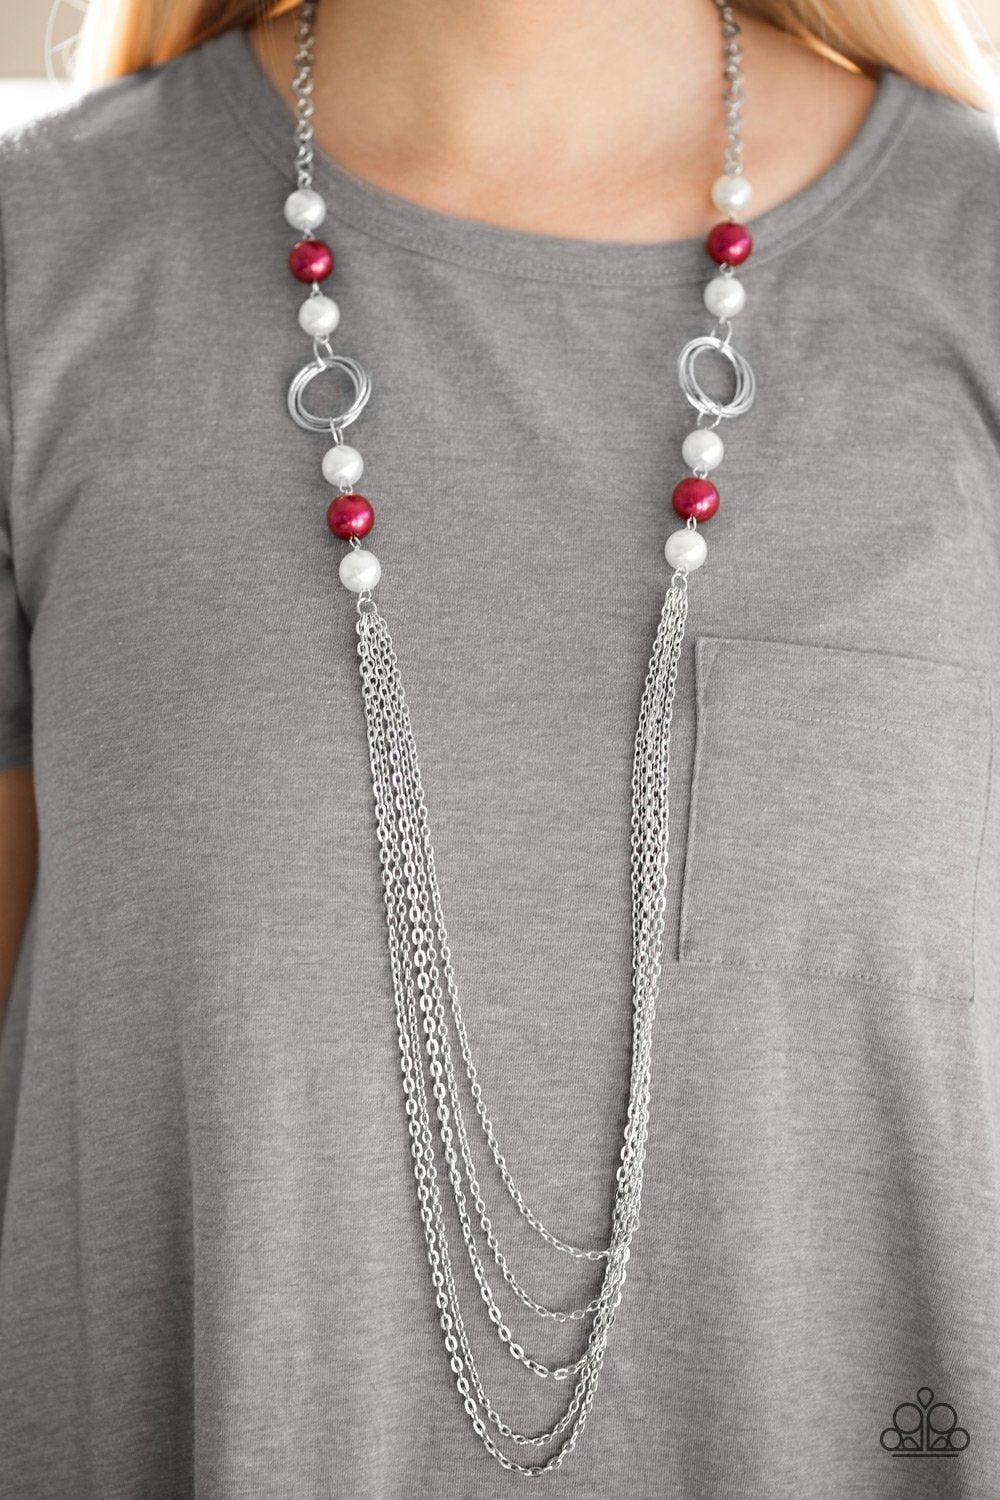 Pour The Wine Red, White and Silver Necklace - Paparazzi Accessories-CarasShop.com - $5 Jewelry by Cara Jewels